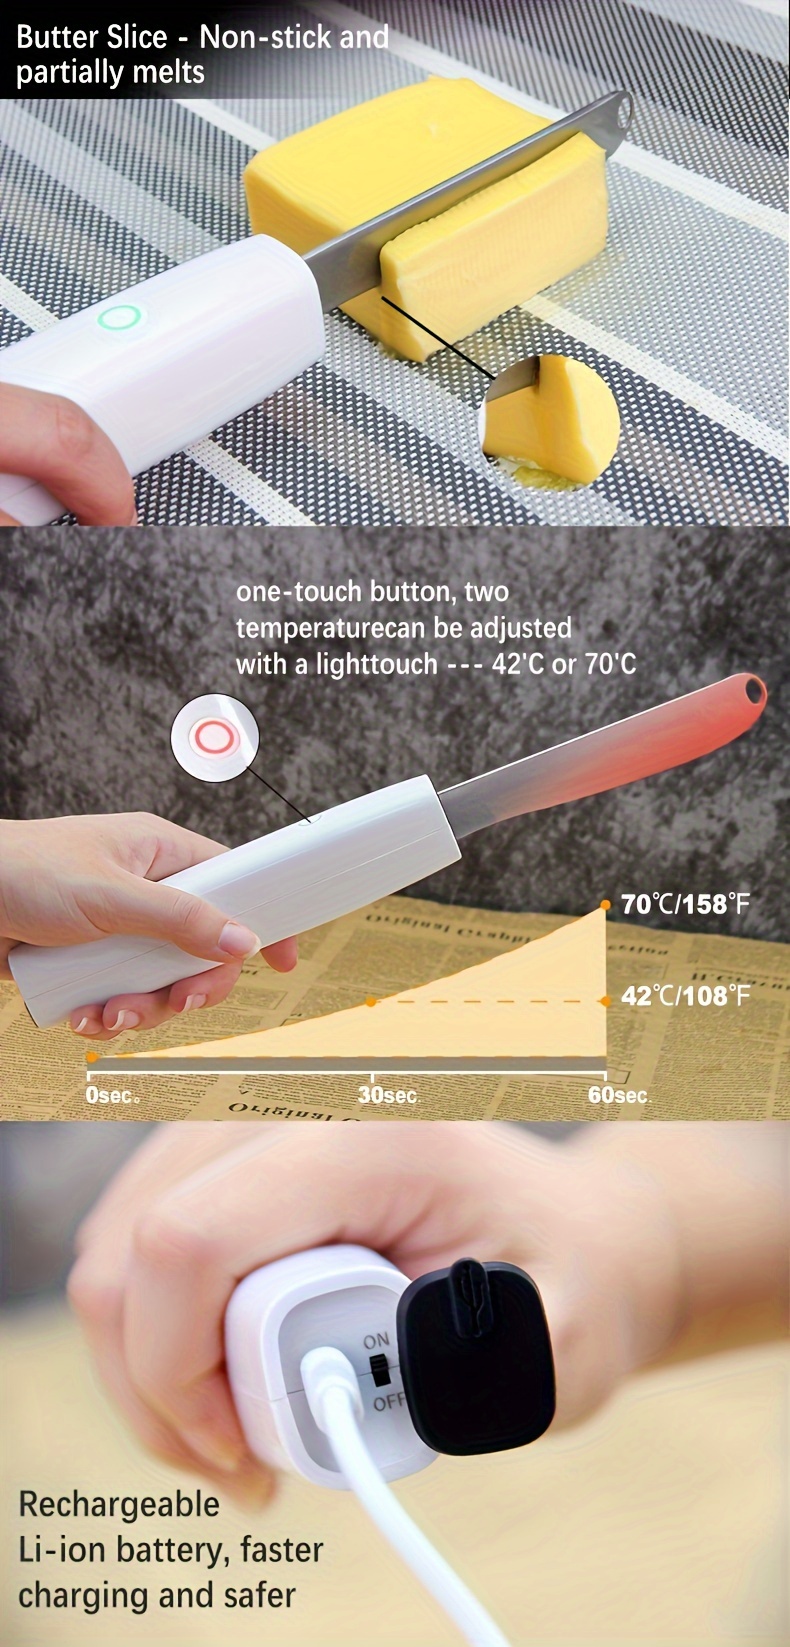 Kitchen Heating Knife: Butter/Cheese - Melting Warming Cutting - Premium  Quality